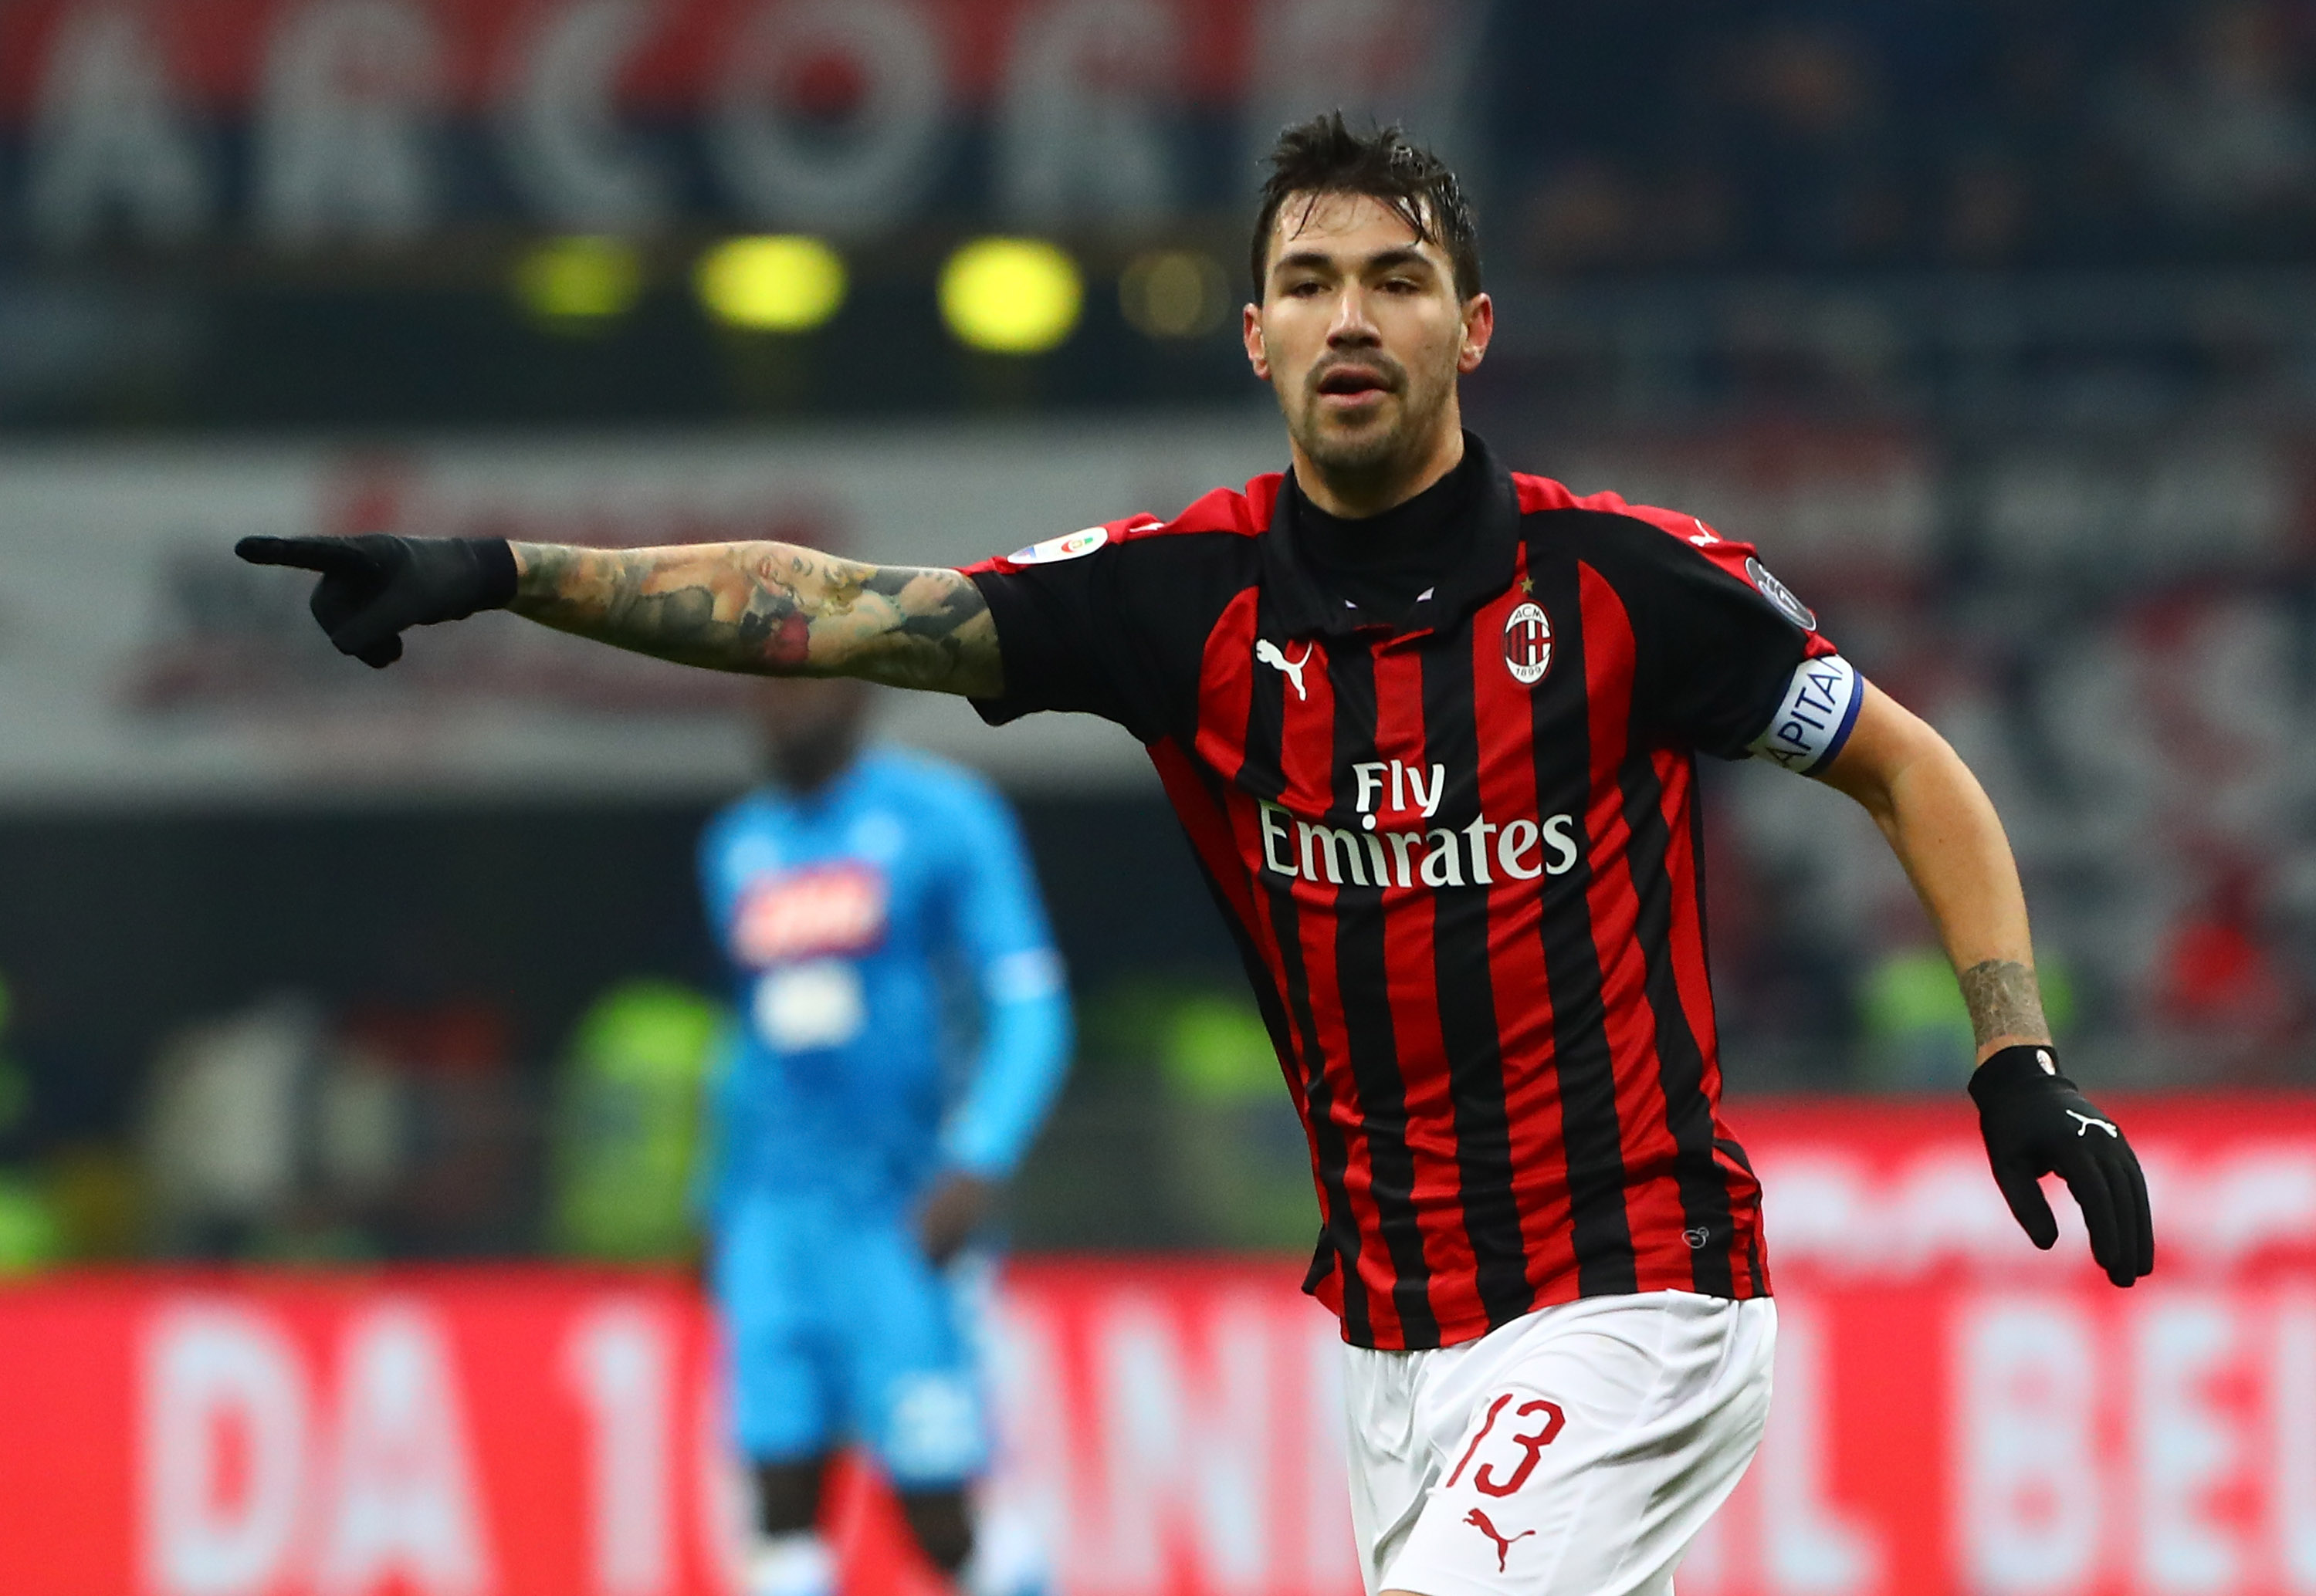 MILAN, ITALY - JANUARY 26: Alessio Romagnoli of AC Milan gestures during the Serie A match between AC Milan and SSC Napoli at Stadio Giuseppe Meazza on January 26, 2019 in Milan, Italy. (Photo by Marco Luzzani/Getty Images)